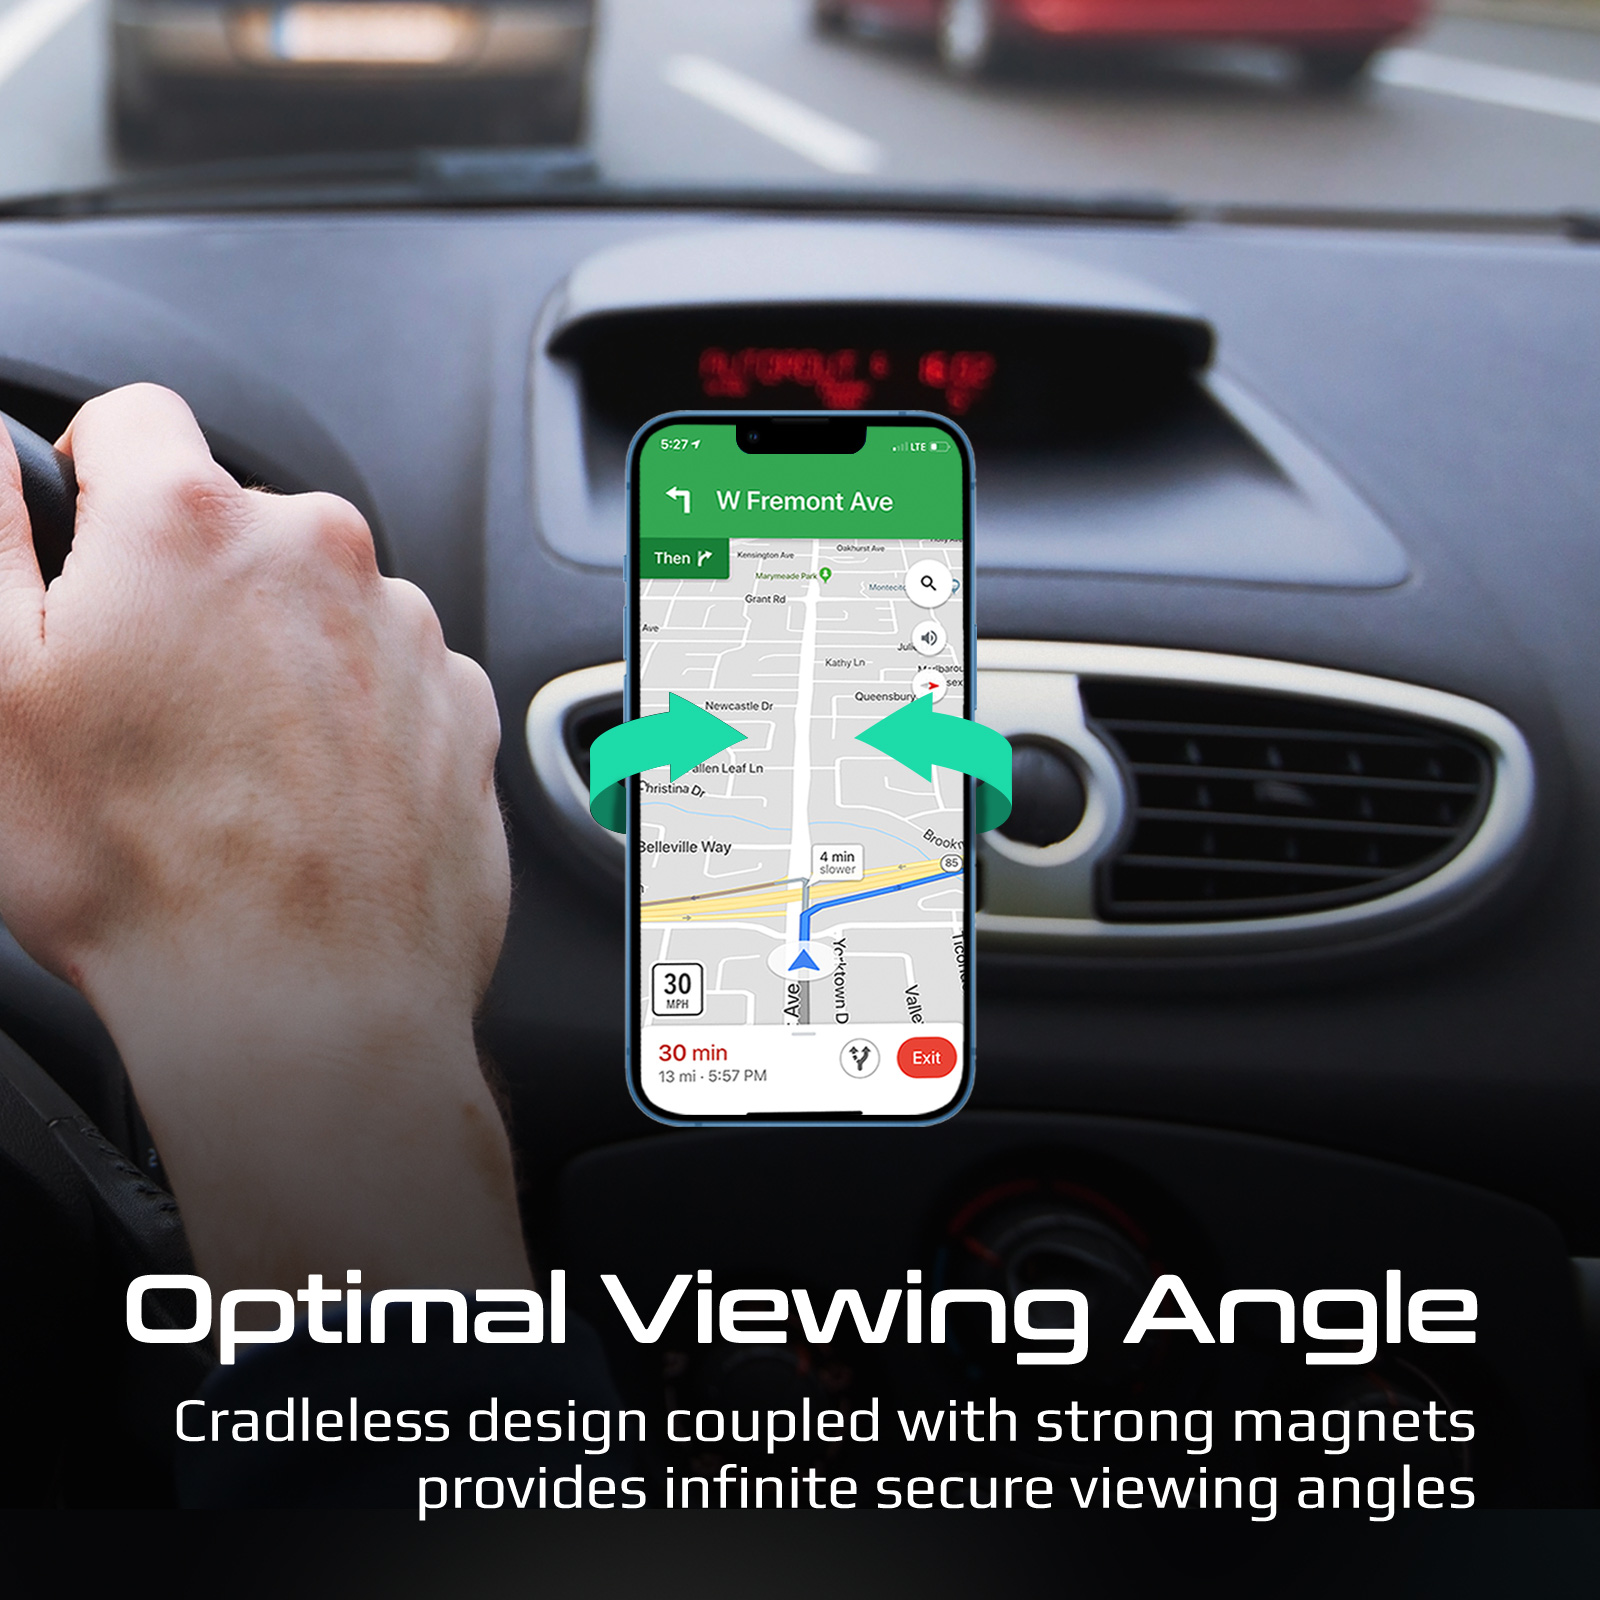 Стойка за кола, ProMate, Ventmag-XL,360 Cradleless Magnetic Car AC Vent Mount for Smartphones • Secure Anti-Slip Mount • Multi-Angle Mounting •  Metal Ring and Rectangular Plate included  , Черен